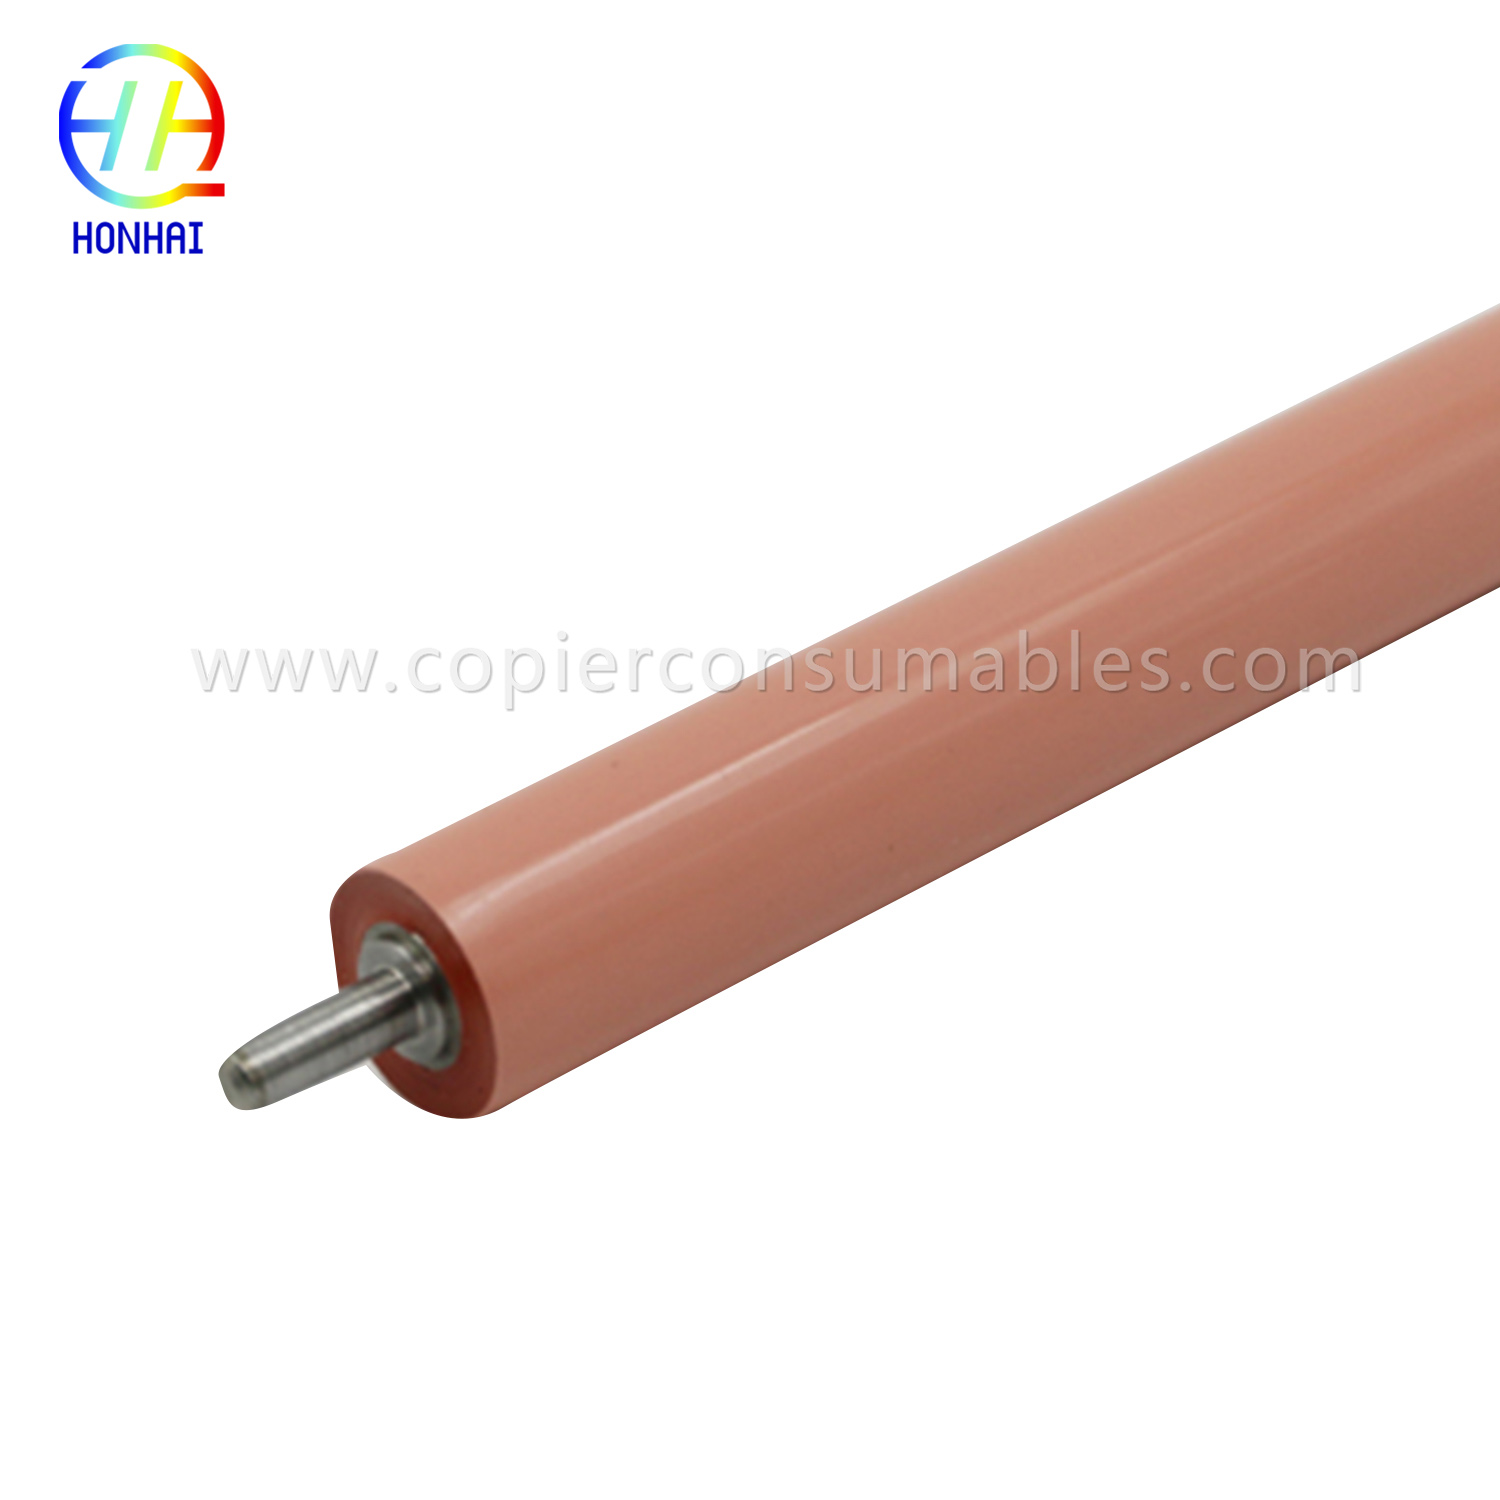 Nedre trykkrulle for HP M377dw M477 (2) 拷贝